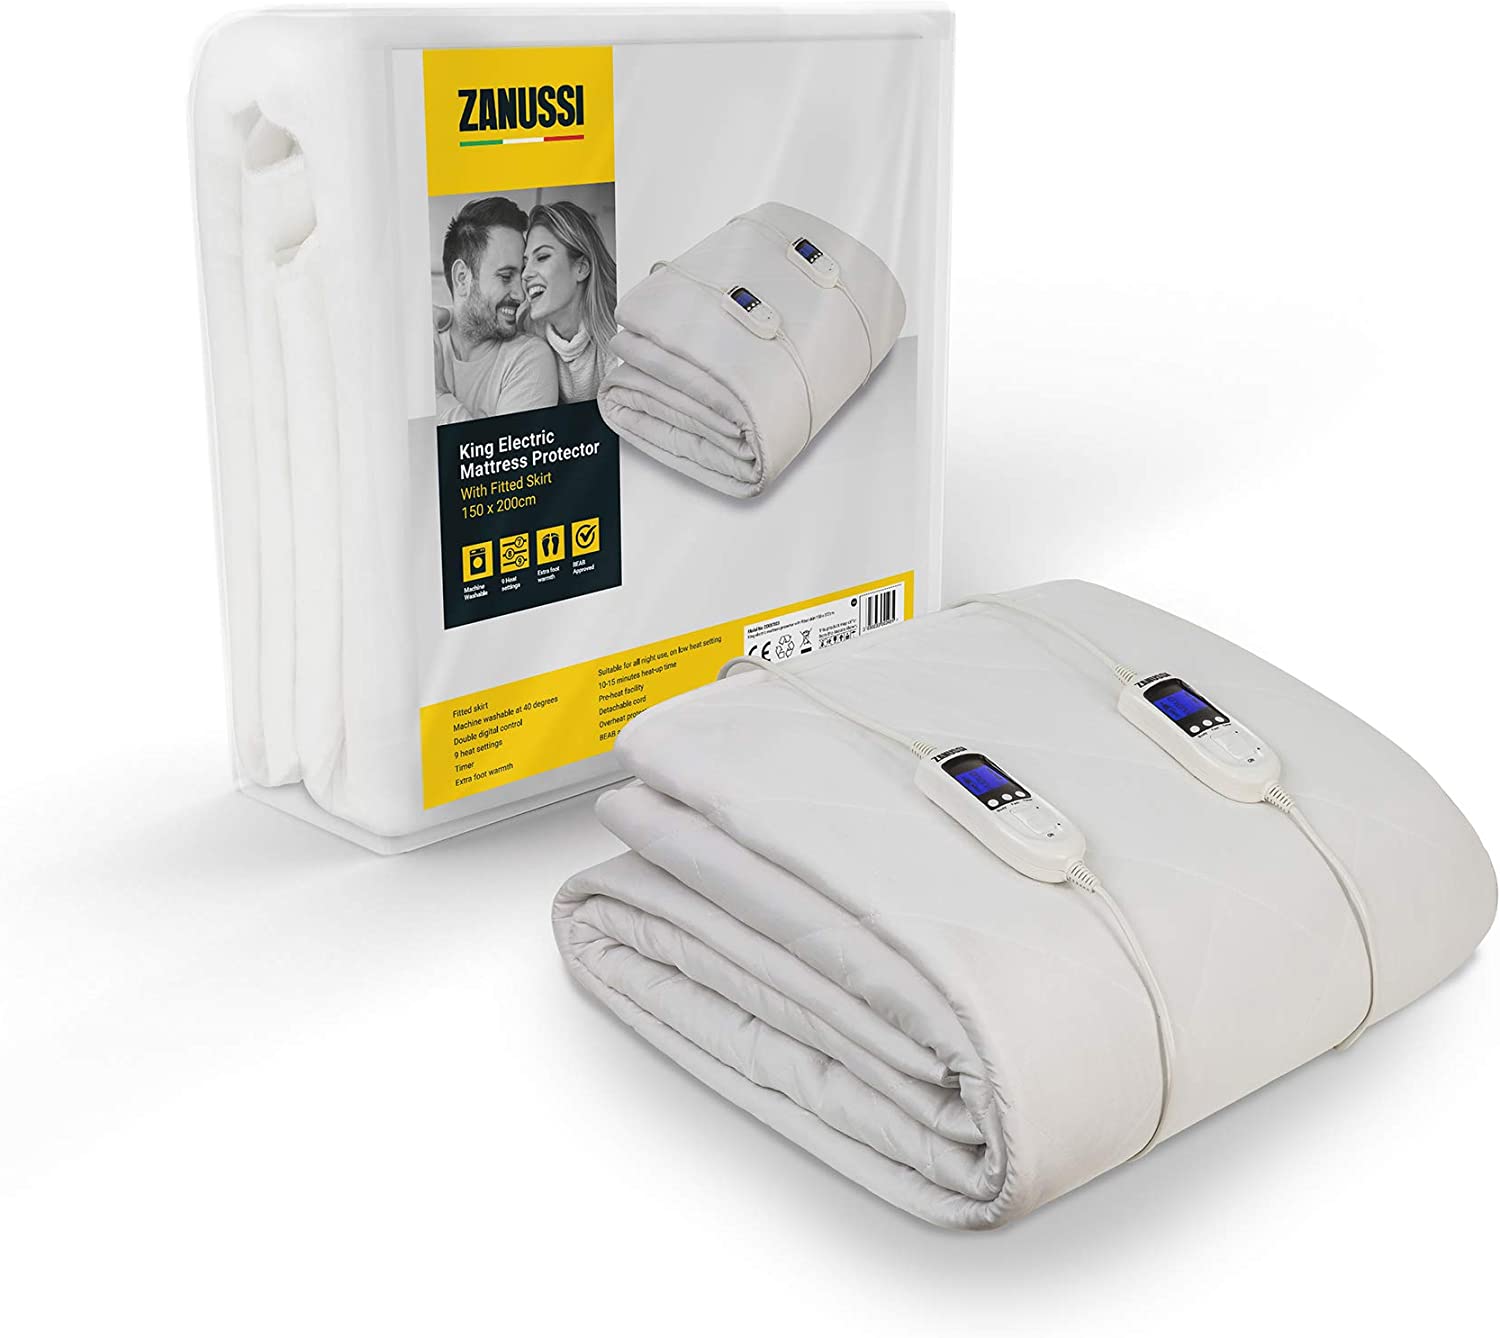 Zanussi King Electric Heated Blanket with 9 Heat Settings and Timer